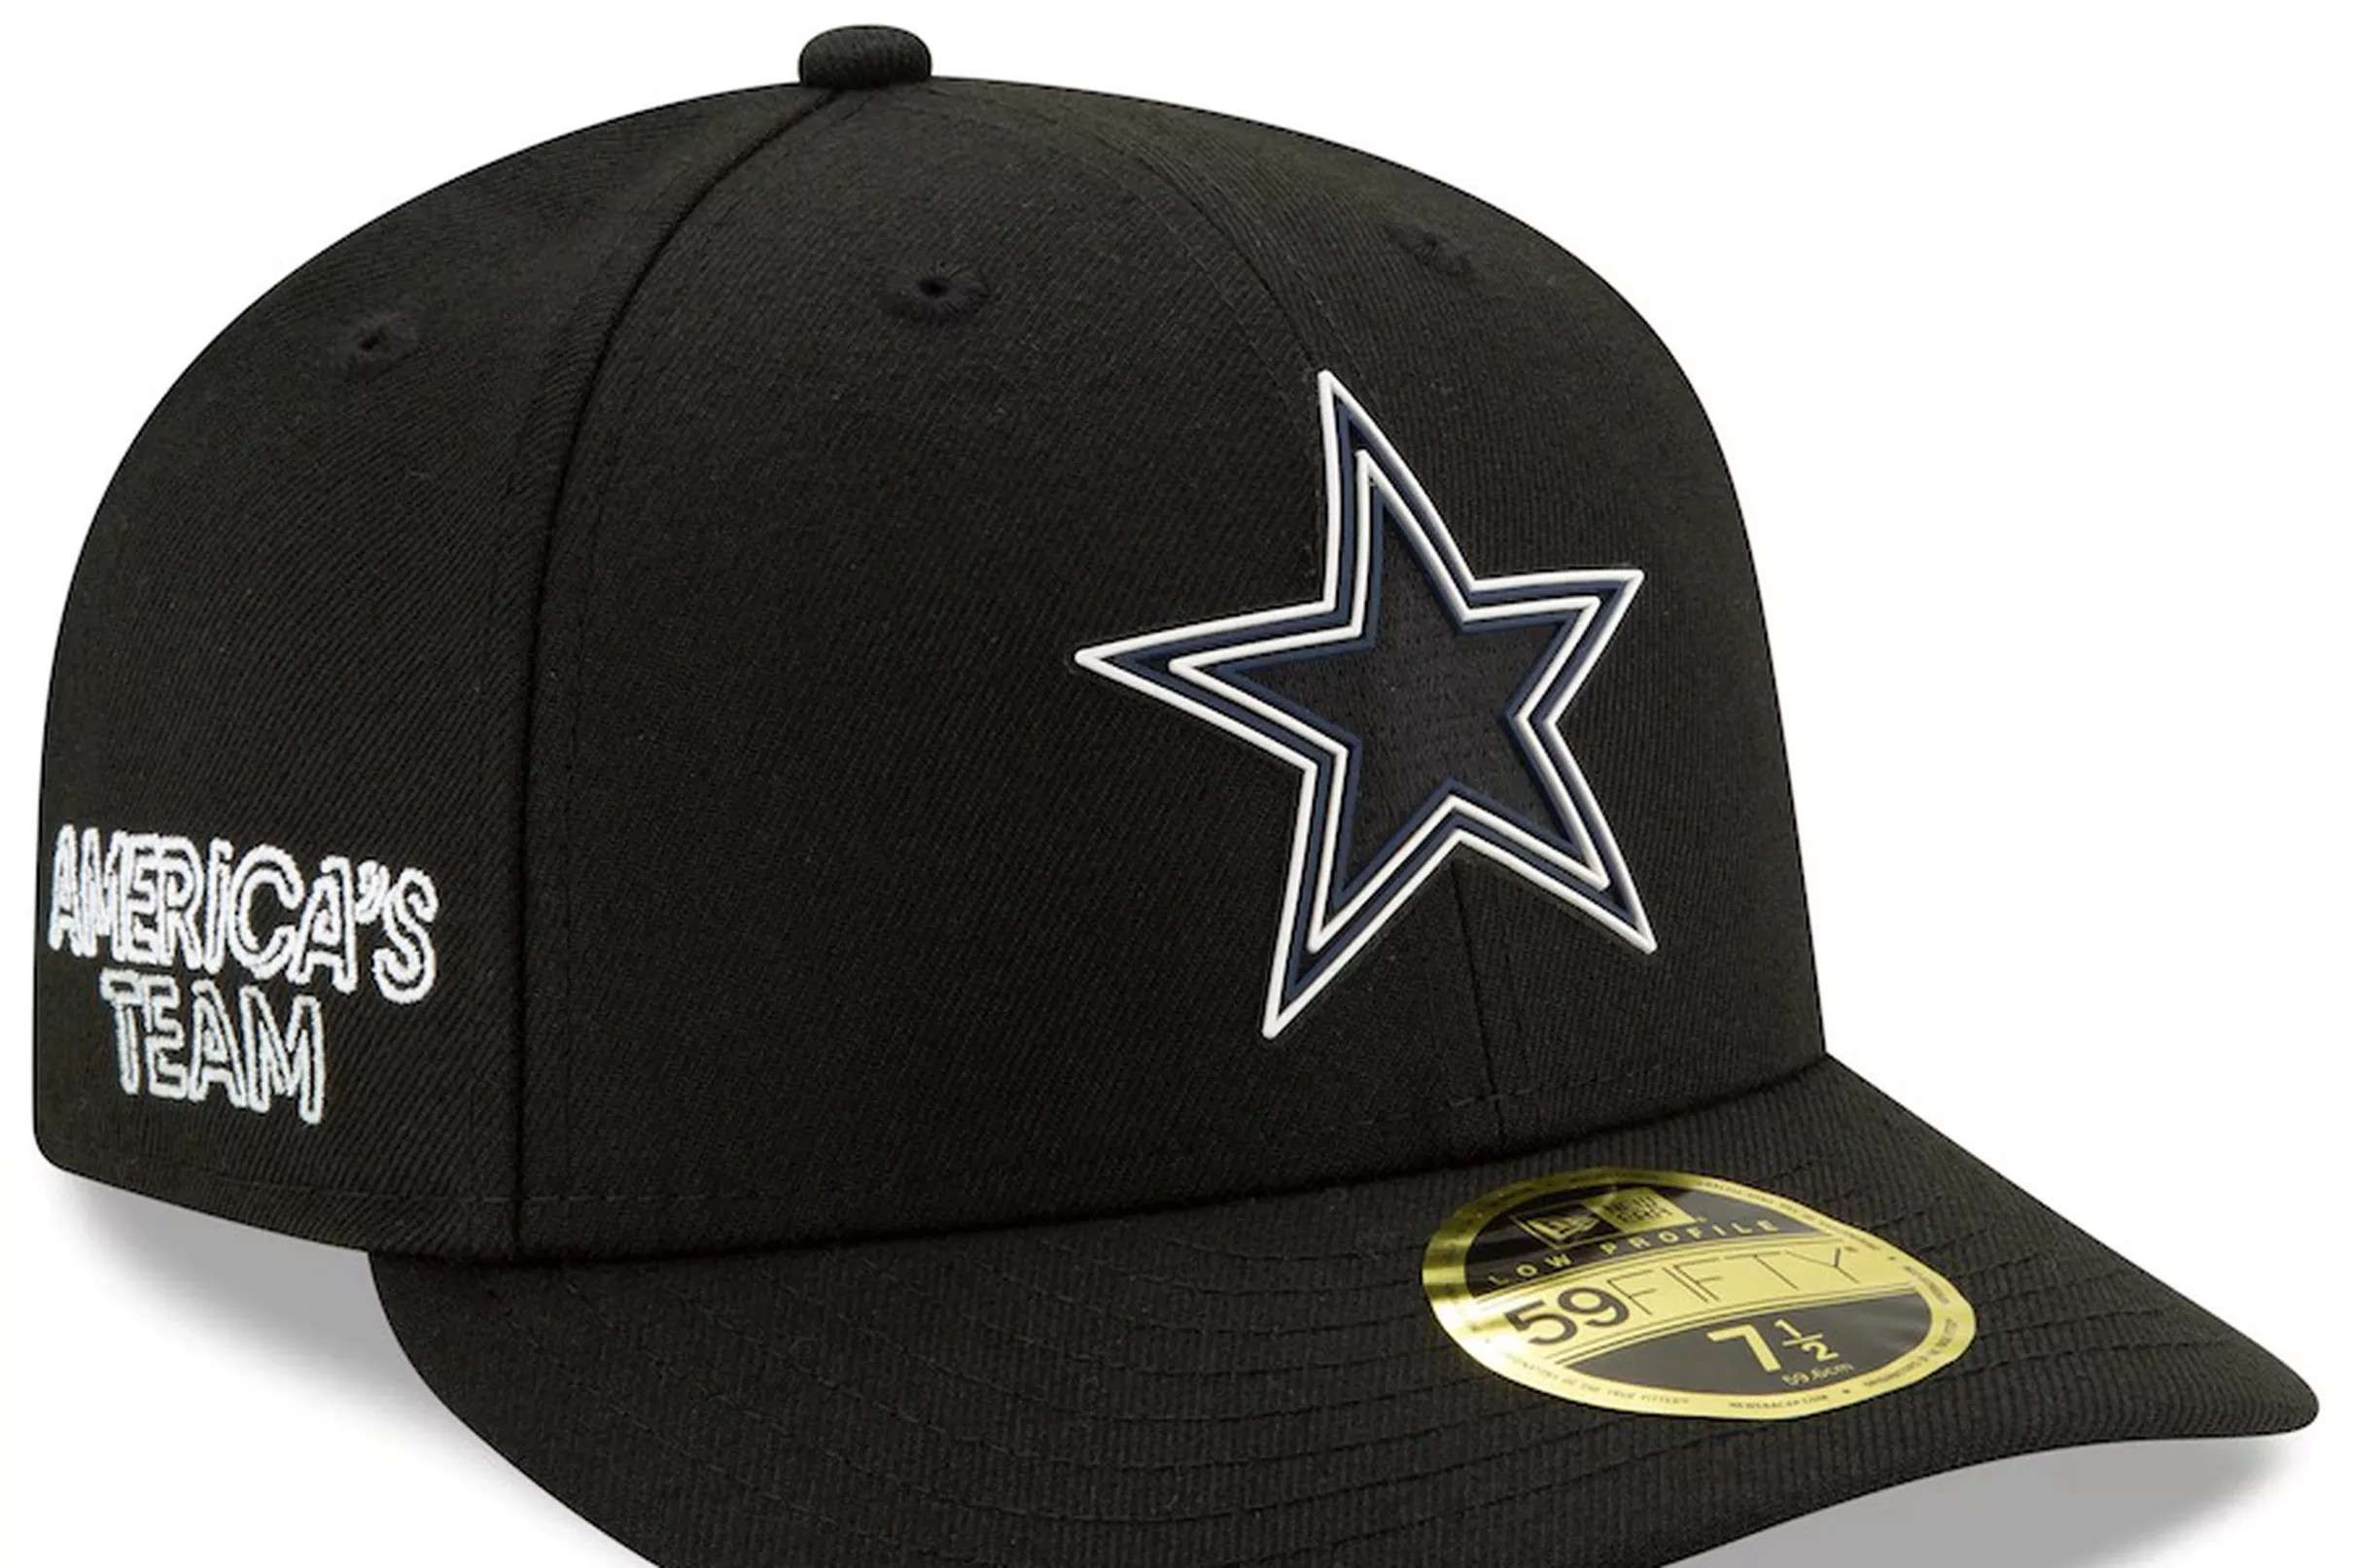 The Cowboys 2020 NFL Draft hats have officially dropped!